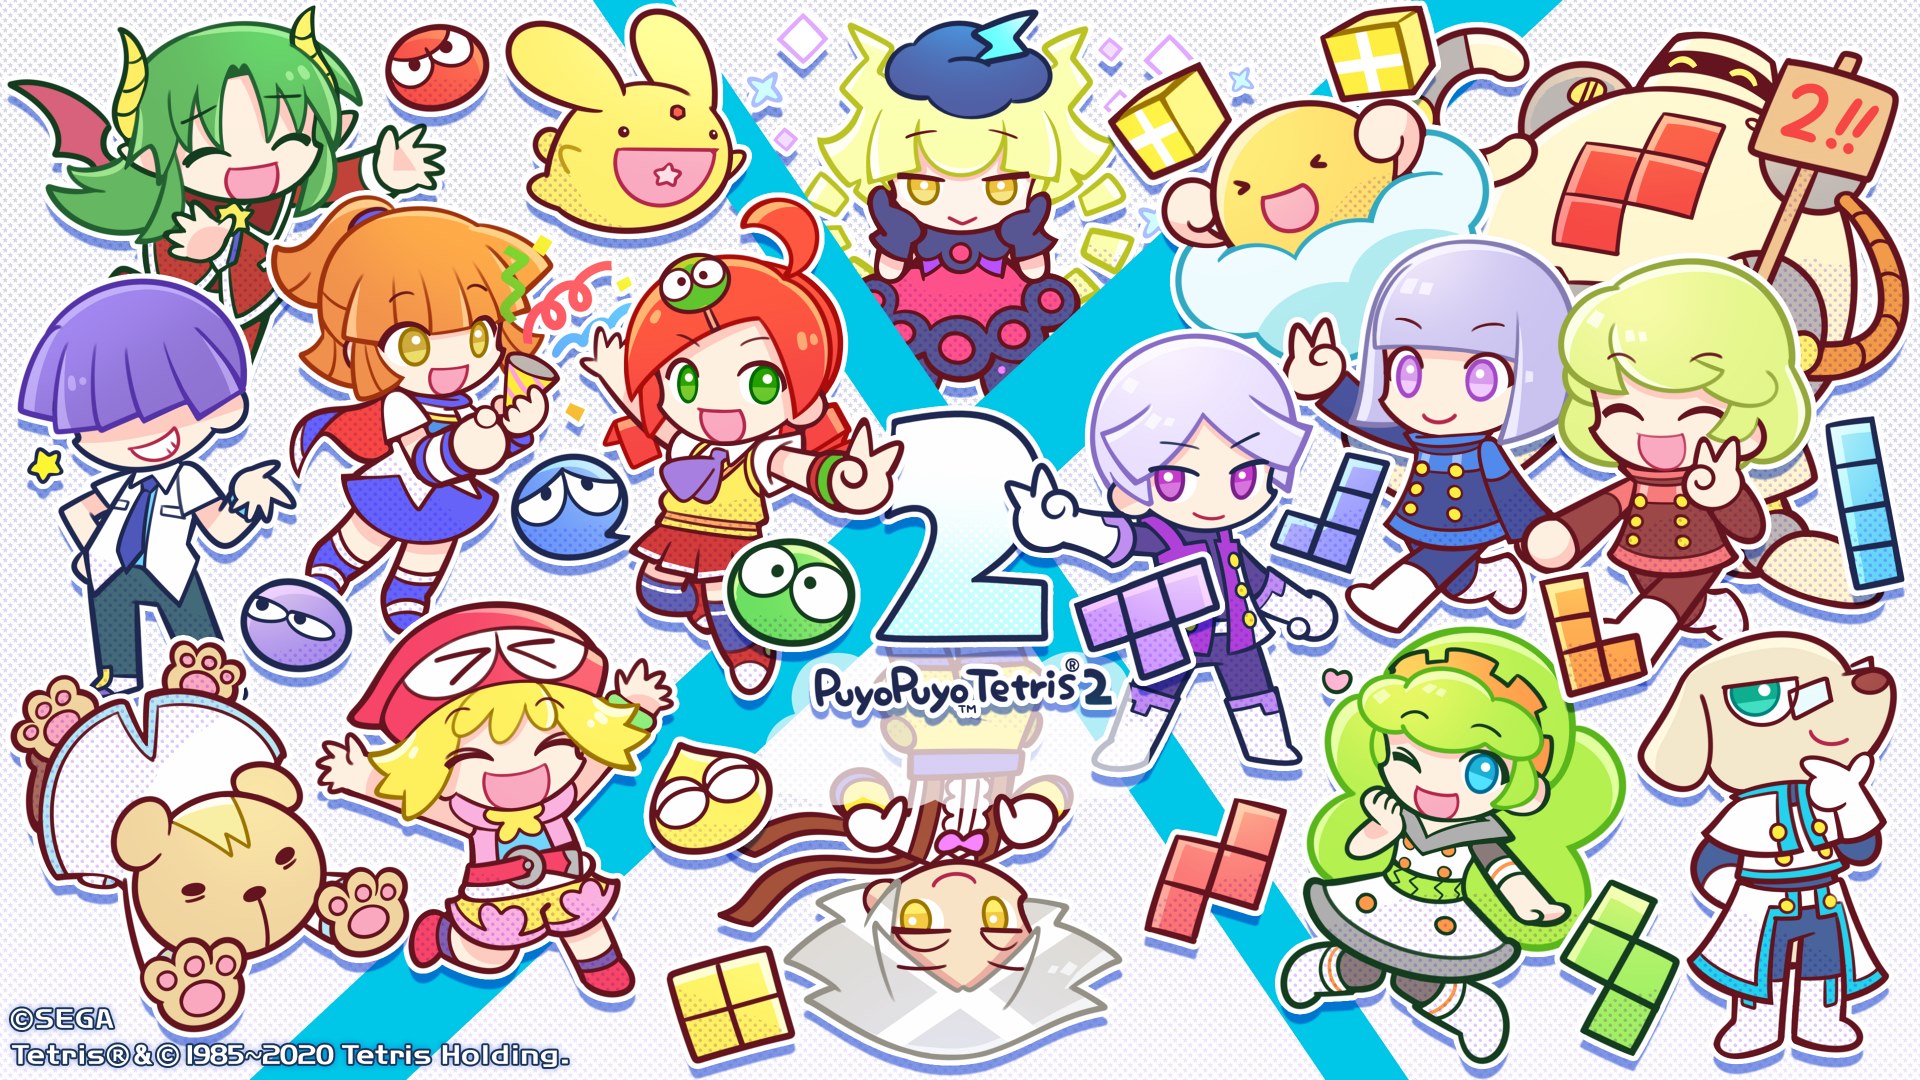 Puyo Puyo Tetris 2 celebrates launch with adorable art from the dev team - ...